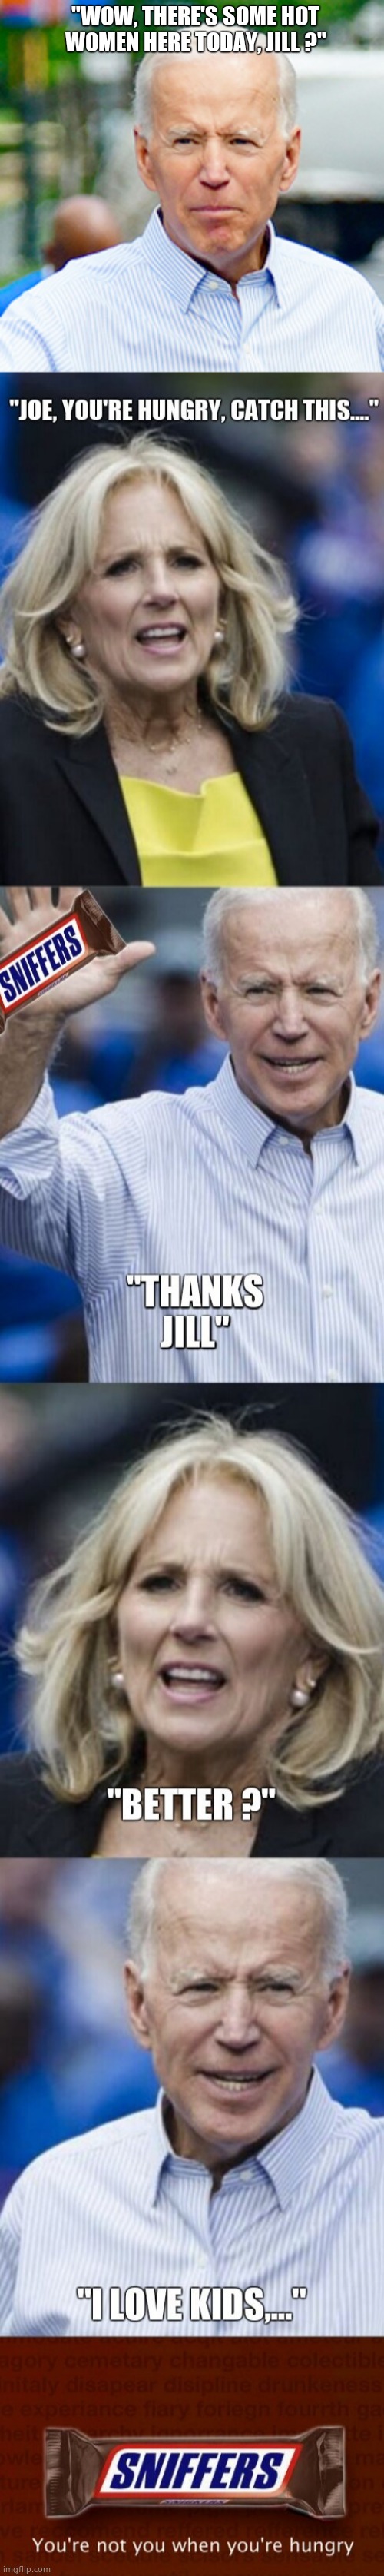 Sniffers | "WOW, THERE'S SOME HOT WOMEN HERE TODAY, JILL ?" | image tagged in memes,creepy joe biden,snickers,sniff,political meme | made w/ Imgflip meme maker